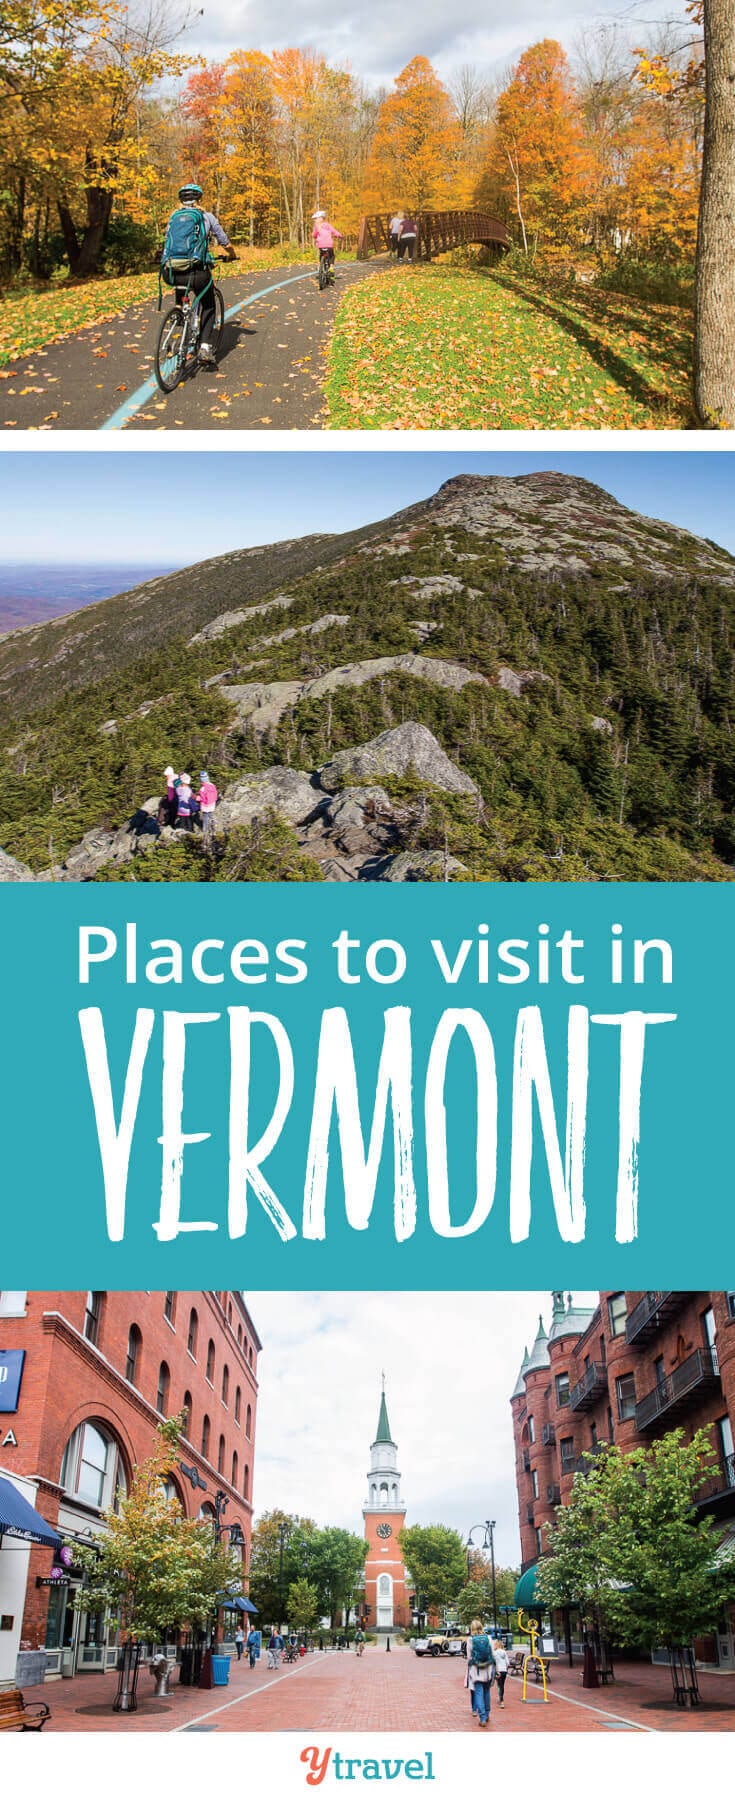 Places to Visit in Vermont, New England. Planning a trip to Vermont? Put these 6 places on your itinerary.